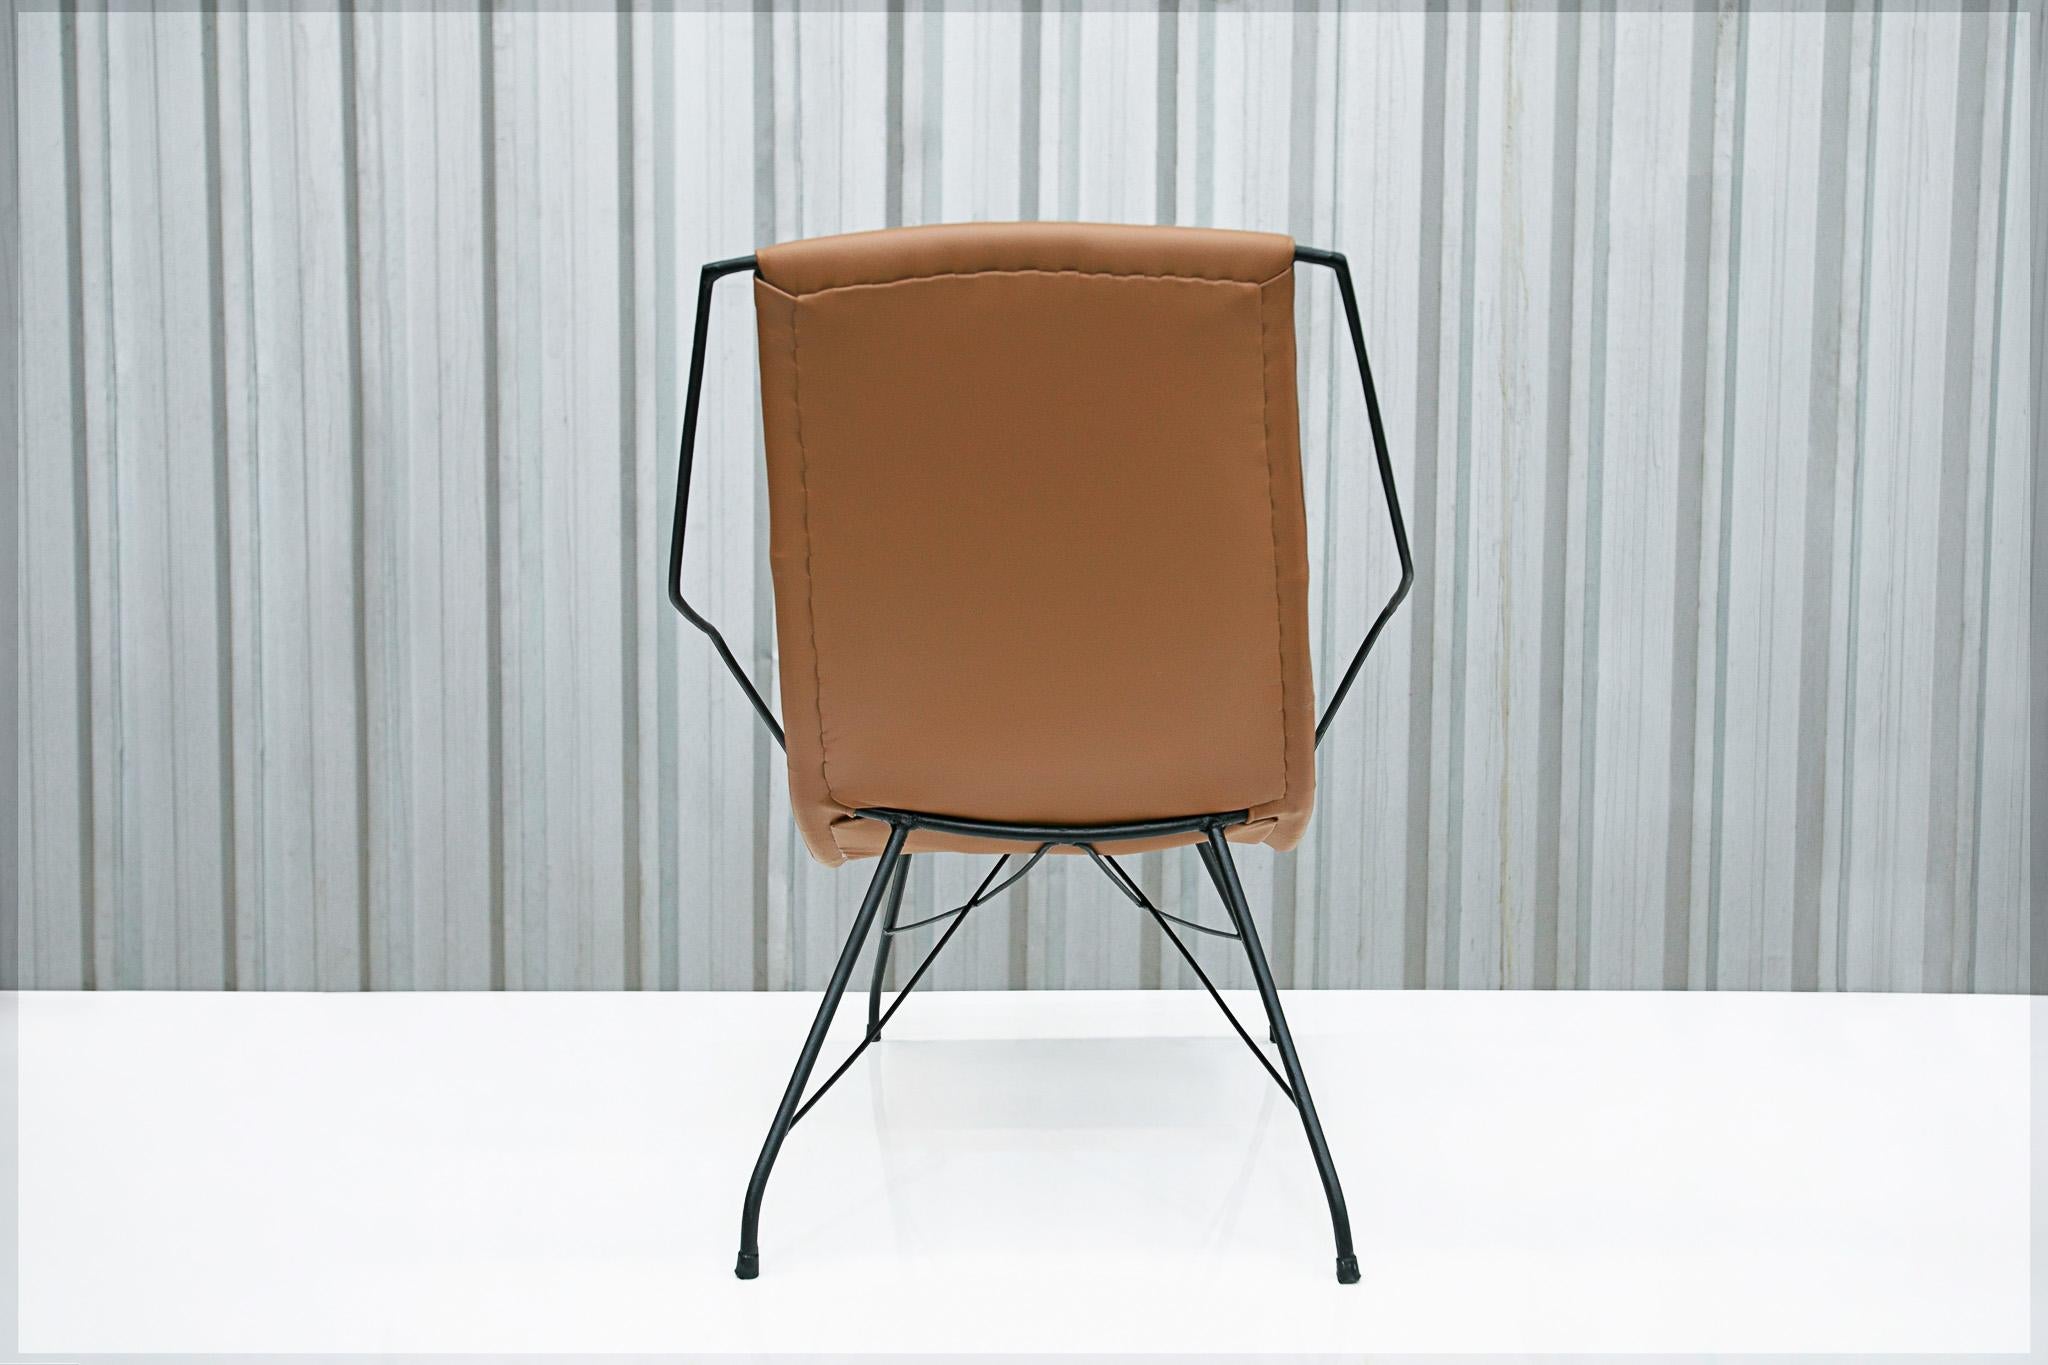 Brazilian Modern Armchair in Brown Leather & Iron, Carlo Hauner, 1950s, Brazil In Good Condition For Sale In New York, NY